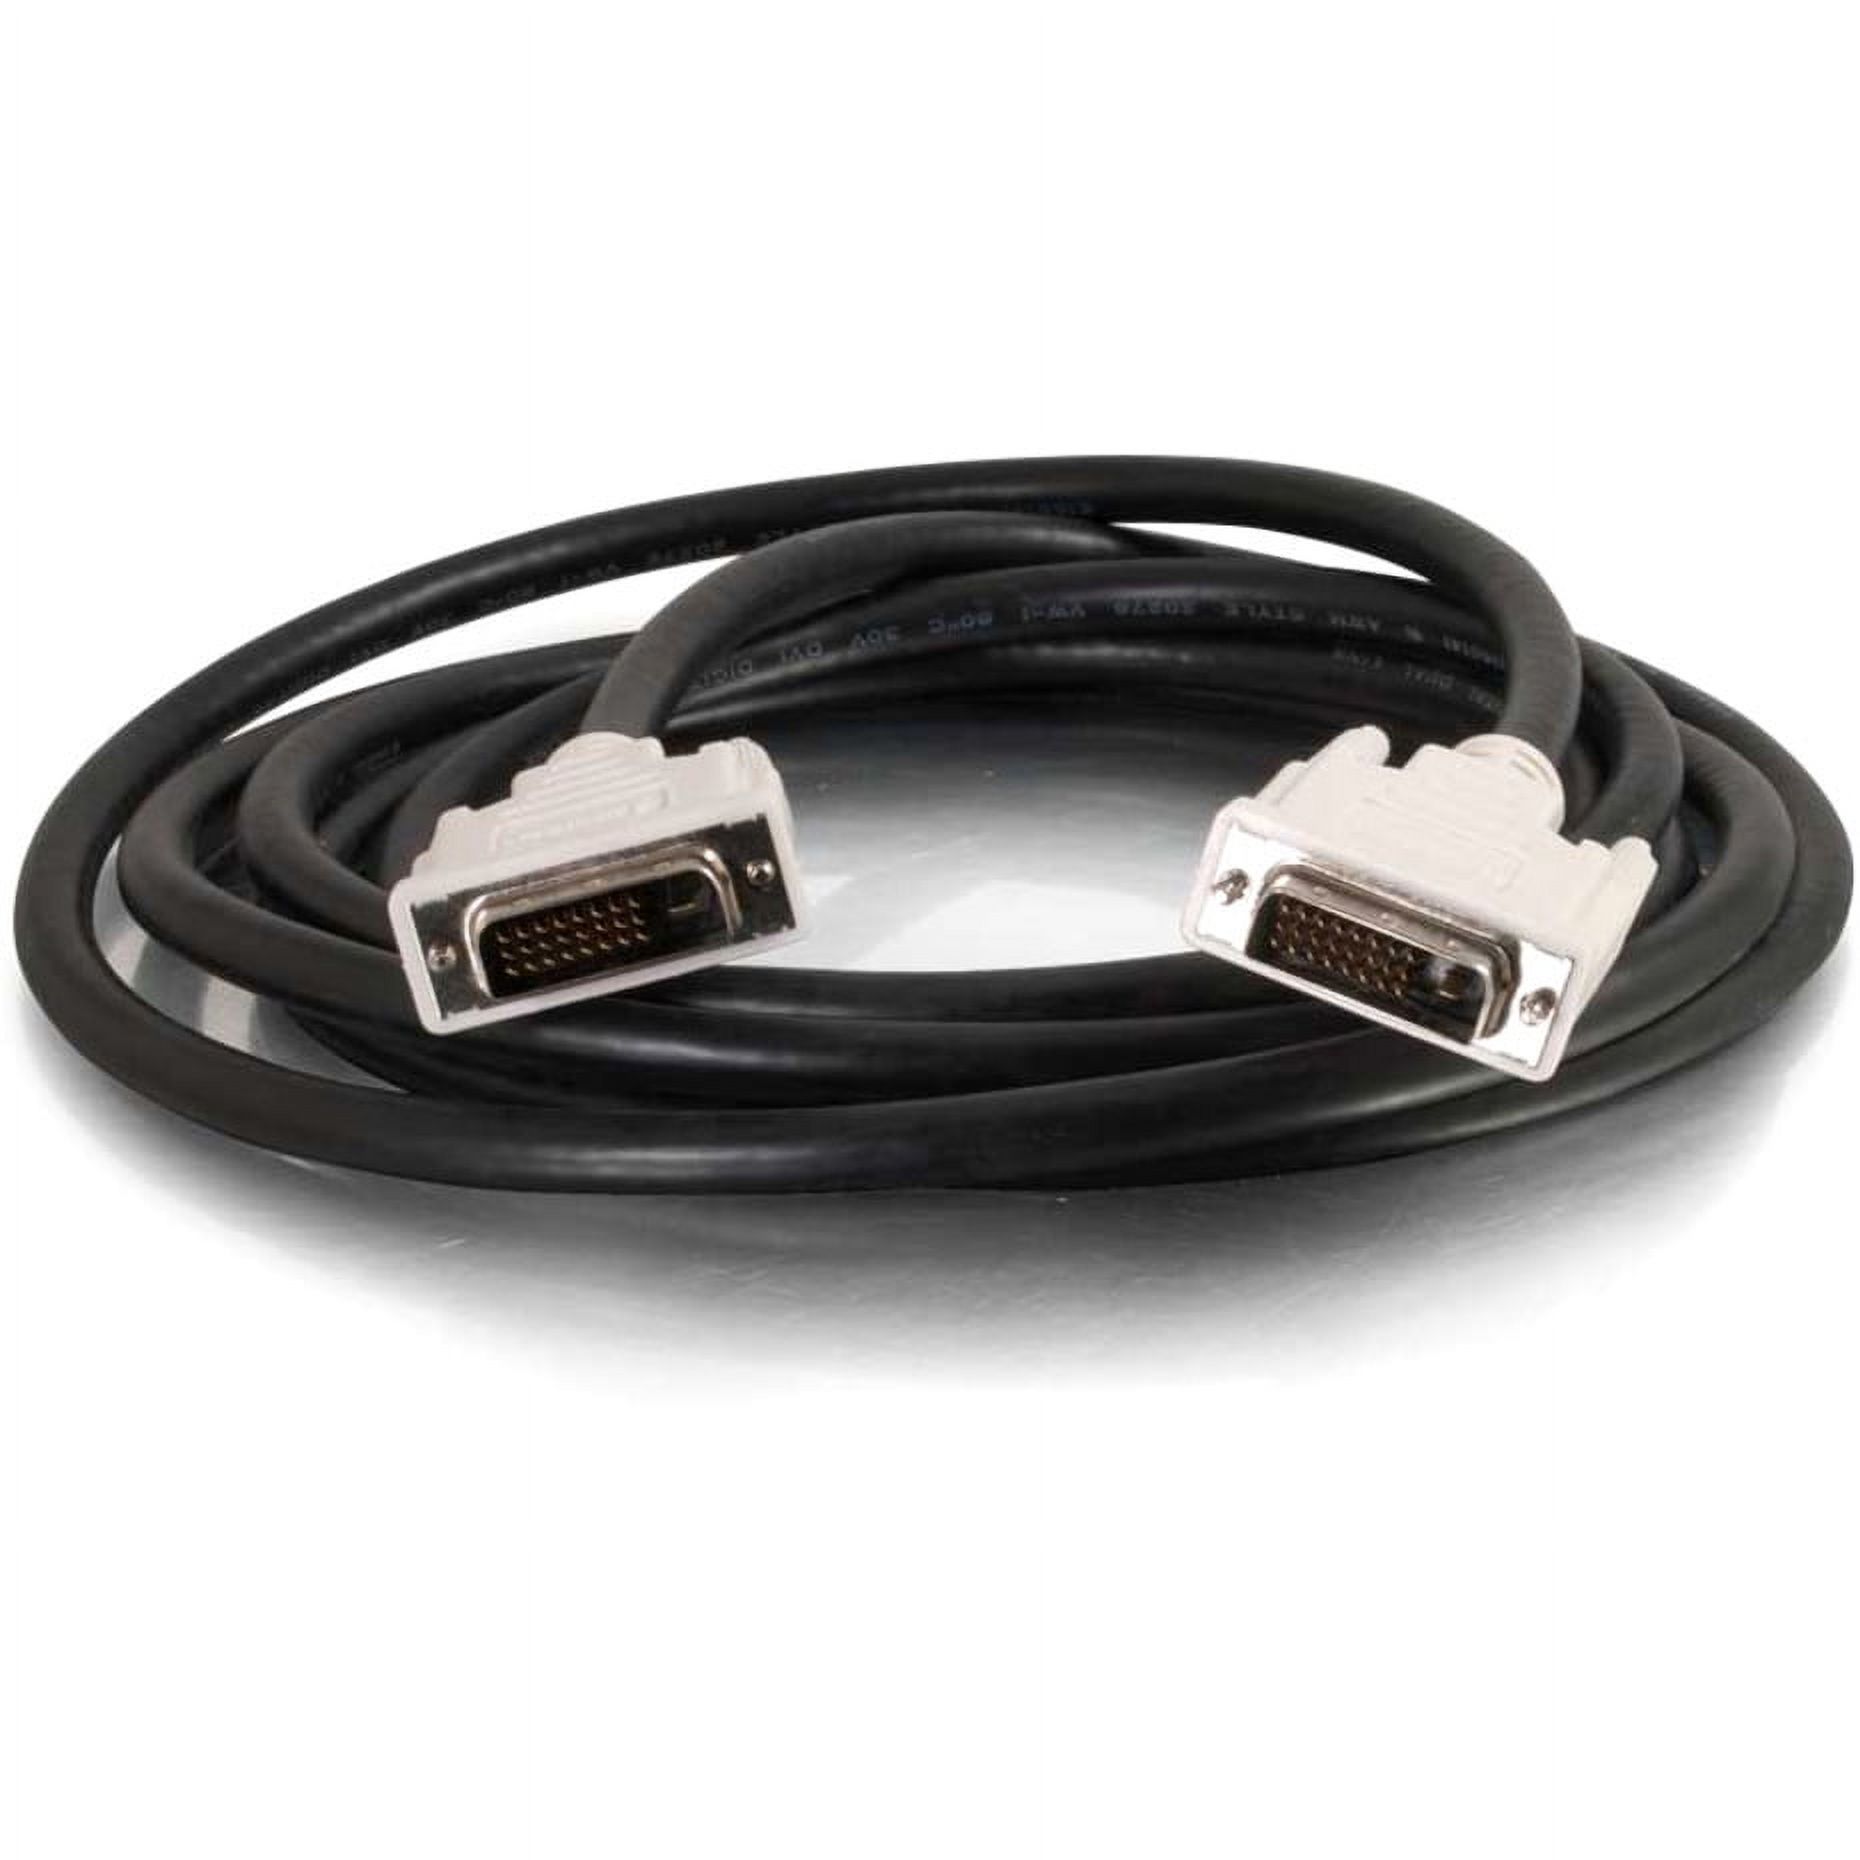 Pre-Owned Cables To Go 29526 16.40 Feet Combined DVI-I Digital/Analog Video Cable - Black Like New - image 3 of 5